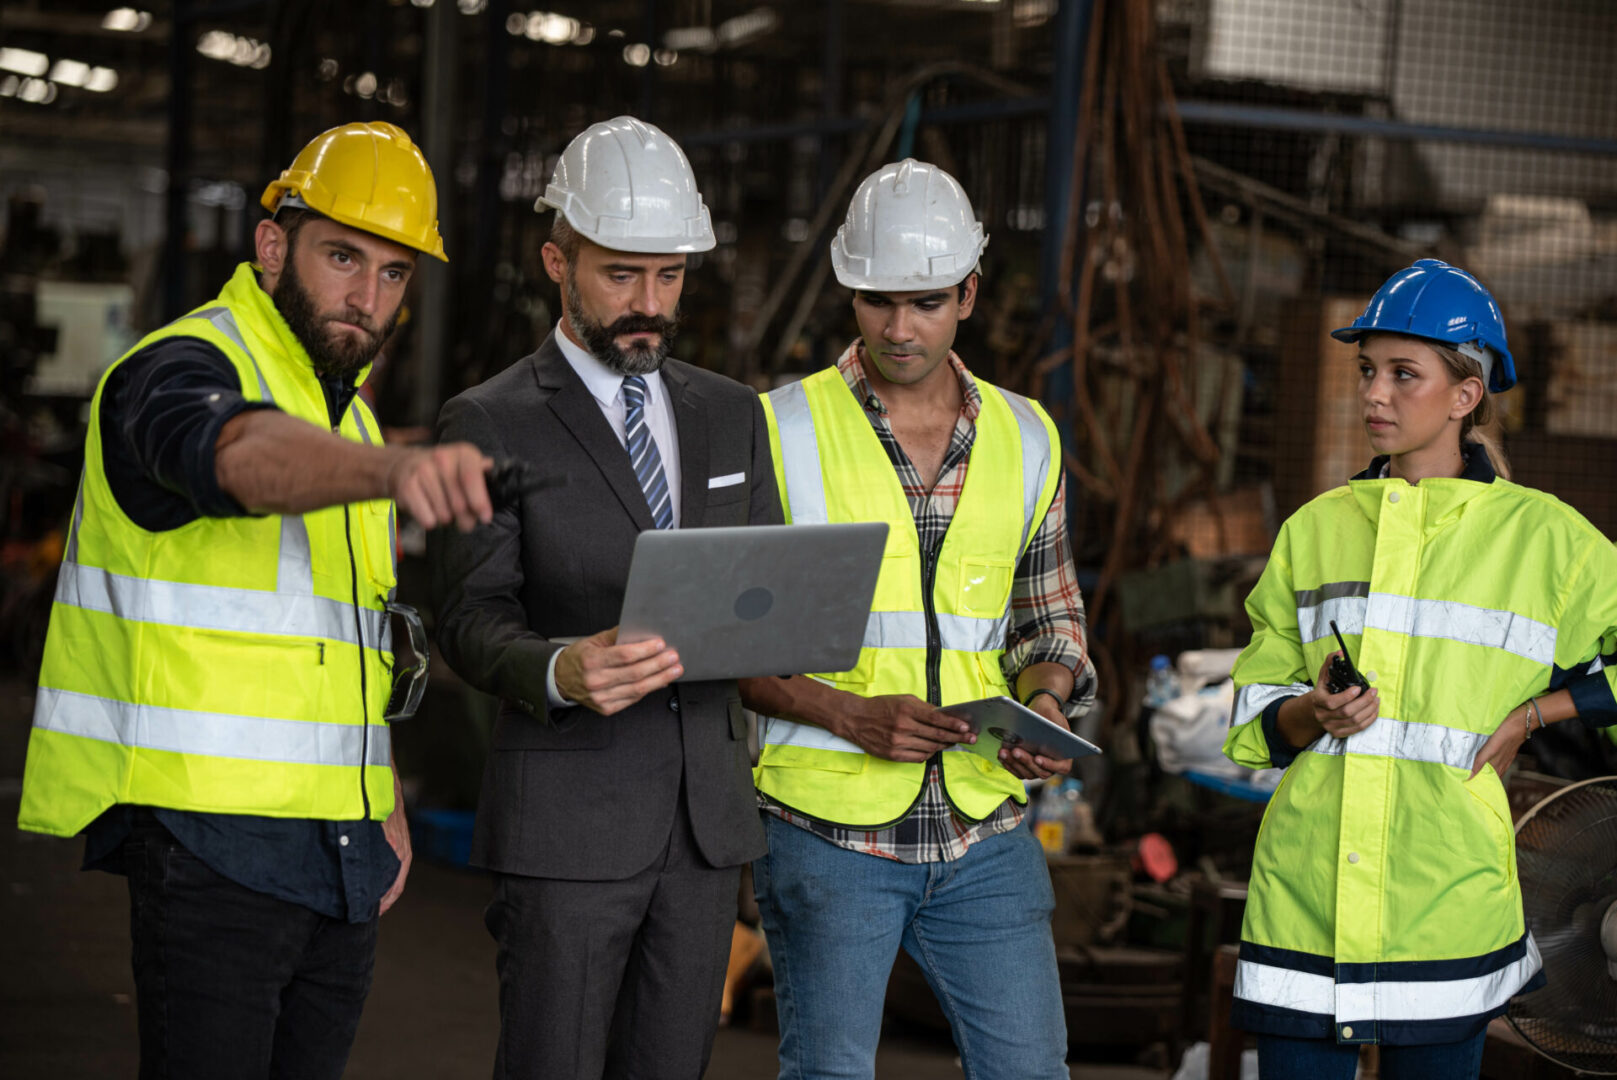 A group of men in hard hats and vests looking at something on a laptop.